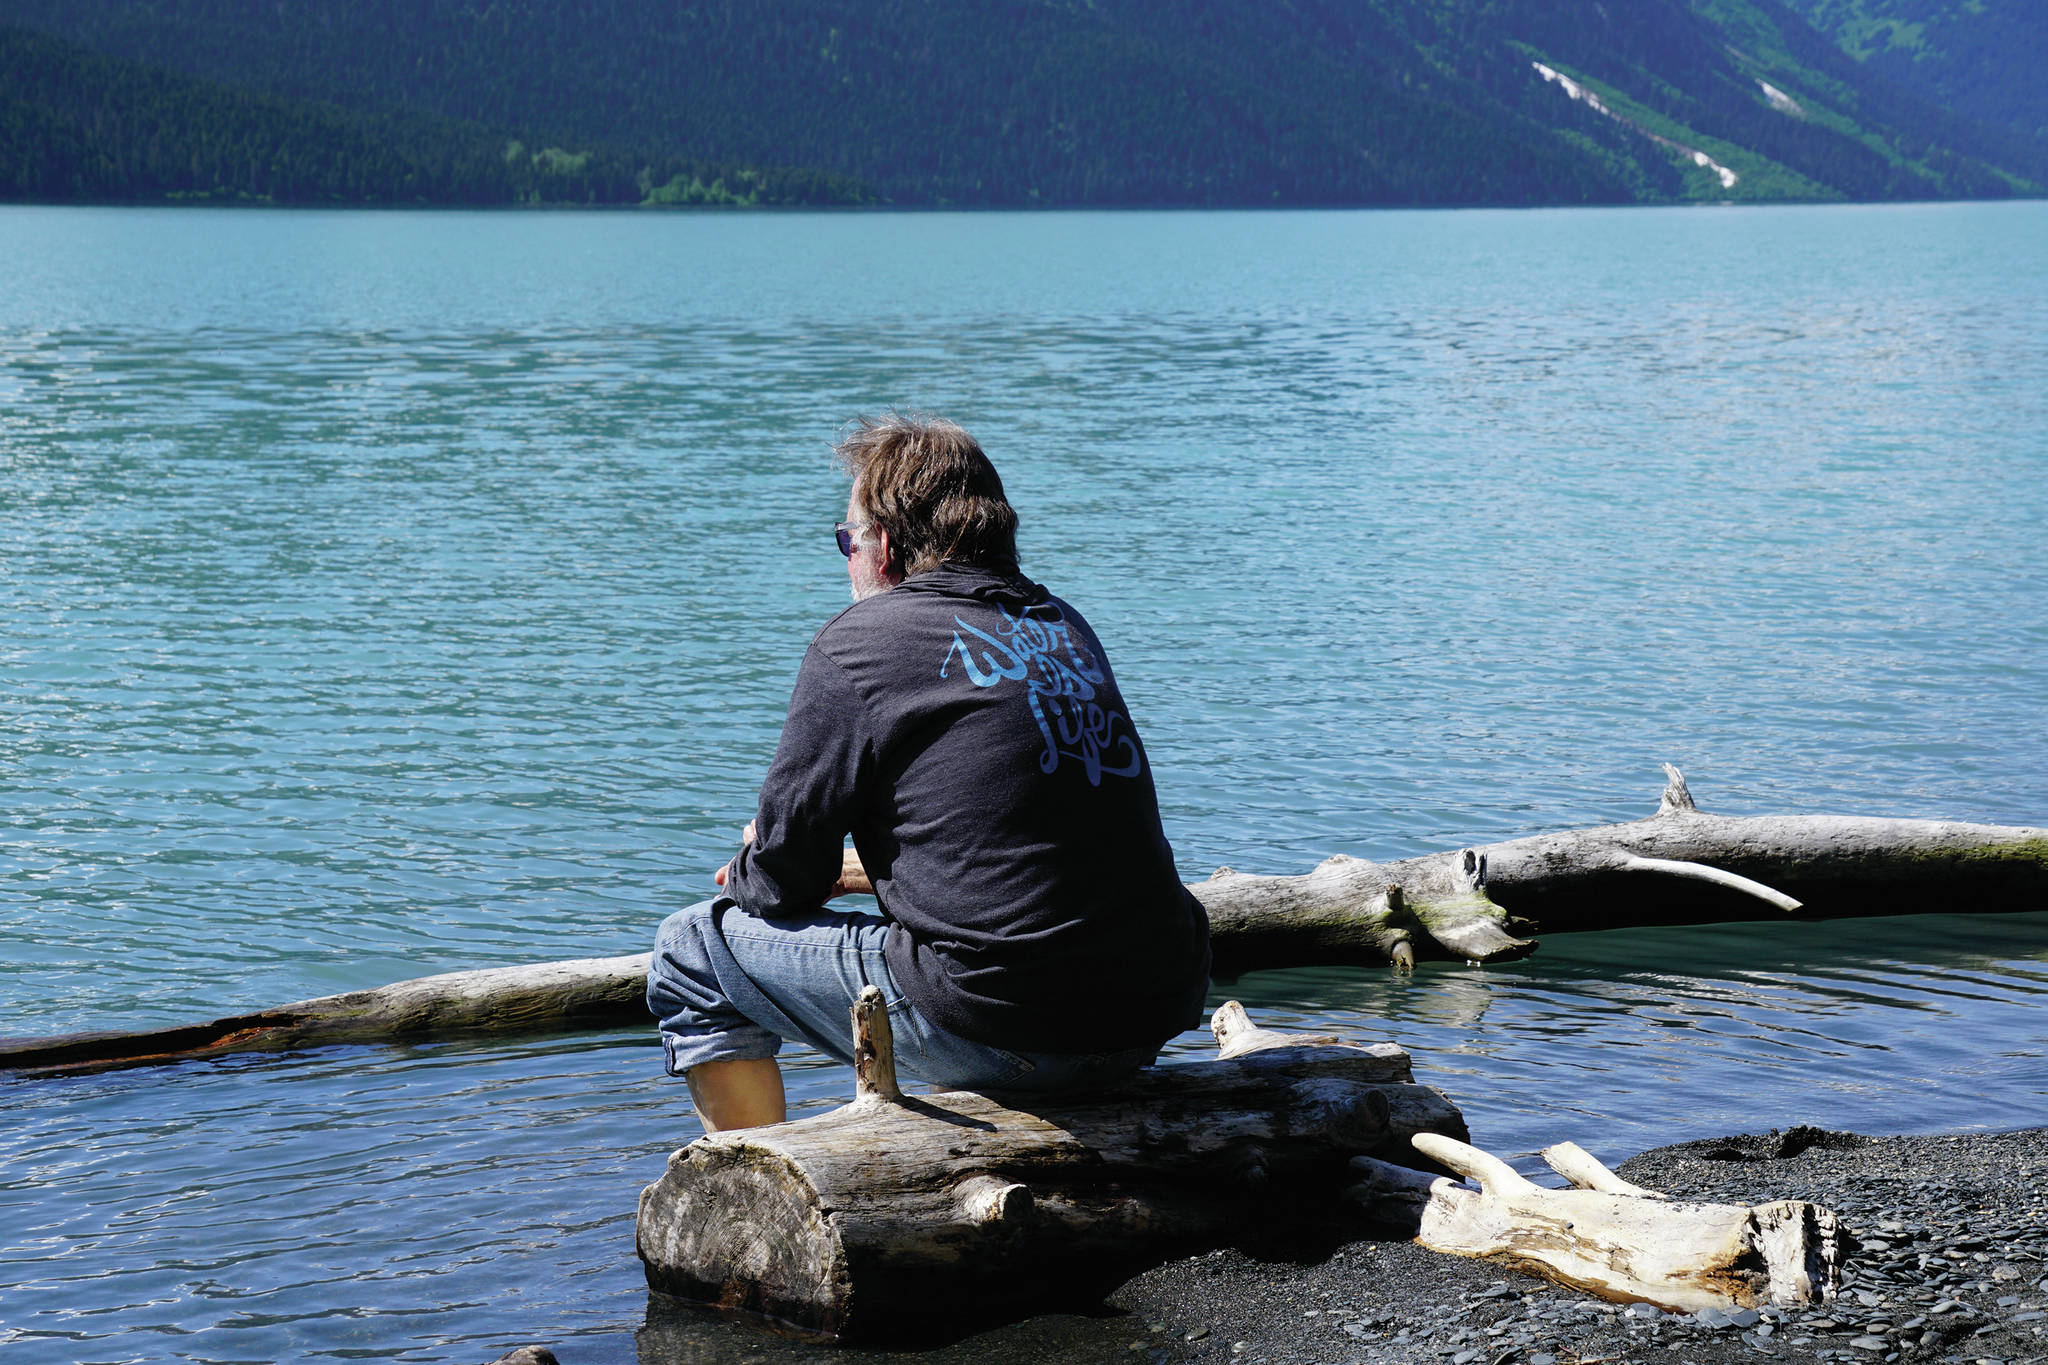 Homer News editor Michael Armstrong contemplates the icy waters of Kenai Lake on Saturday, June 12, 2021, at the Trail River Campground near Seward, Alaska. (Photo by Jennifer Stroyeck)